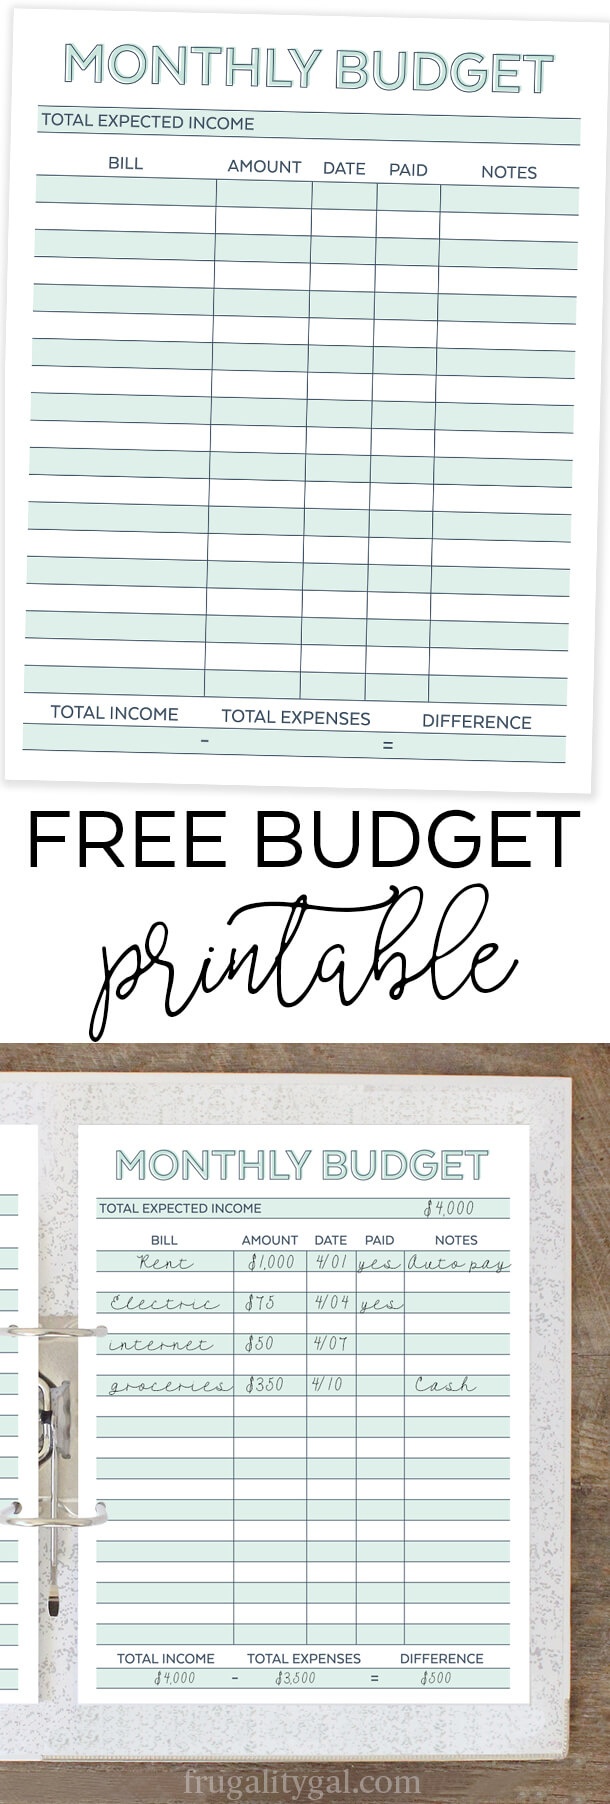 Monthly Budget Planner - Free Printable Budget Worksheet - Free Printable Budget Binder